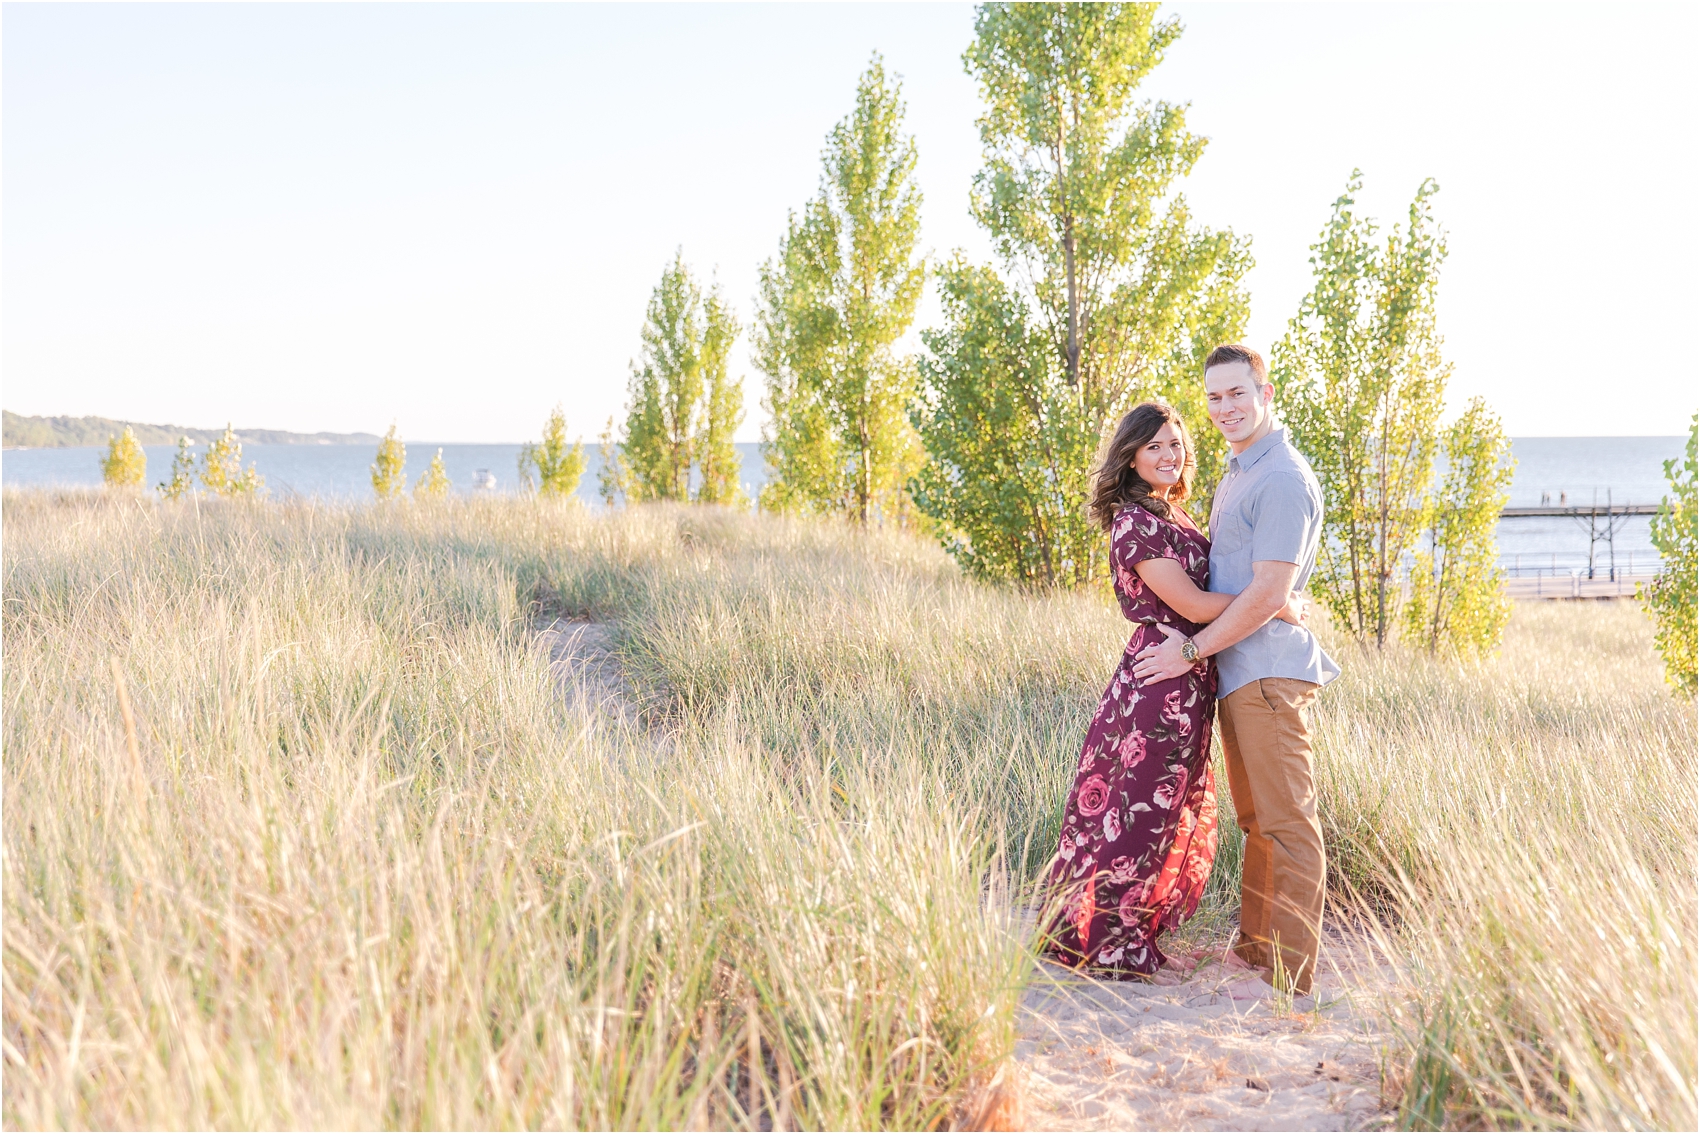 candid-end-of-summer-sunset-engagement-photos-at-silver-beach-in-st-joseph-mi-by-courtney-carolyn-photography_0025.jpg